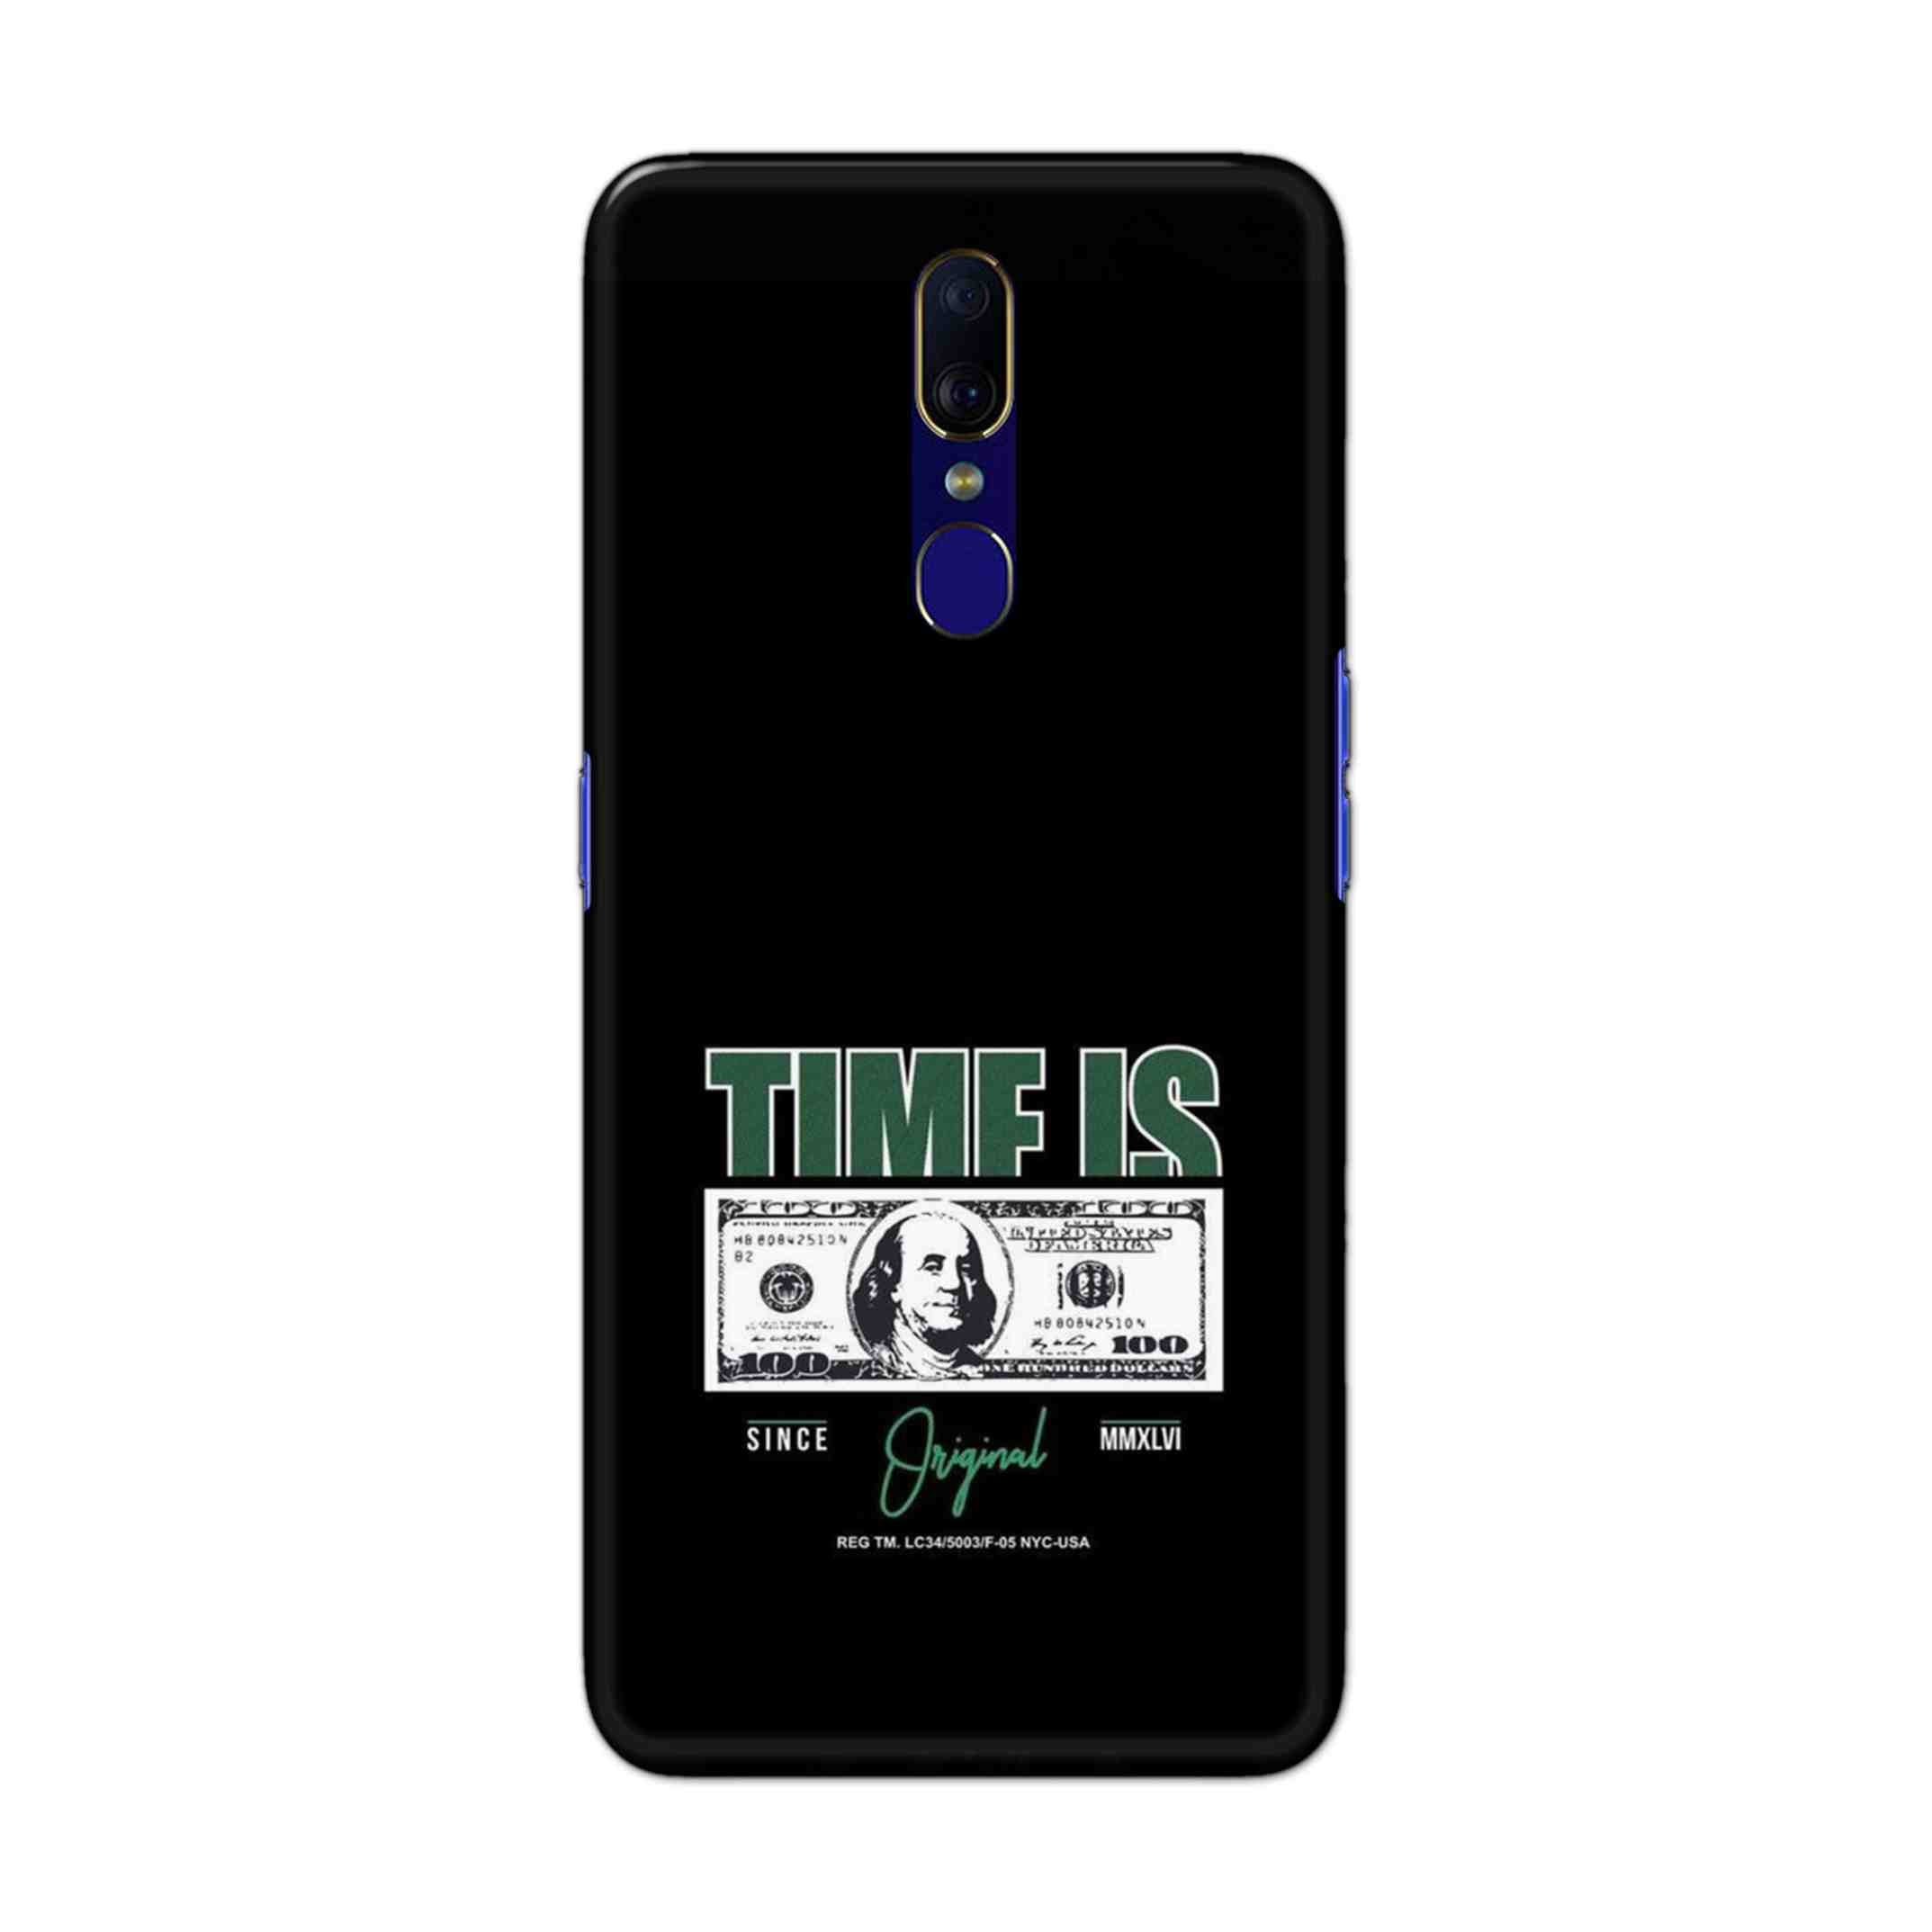 Buy Time Is Money Hard Back Mobile Phone Case Cover For OPPO F11 Online